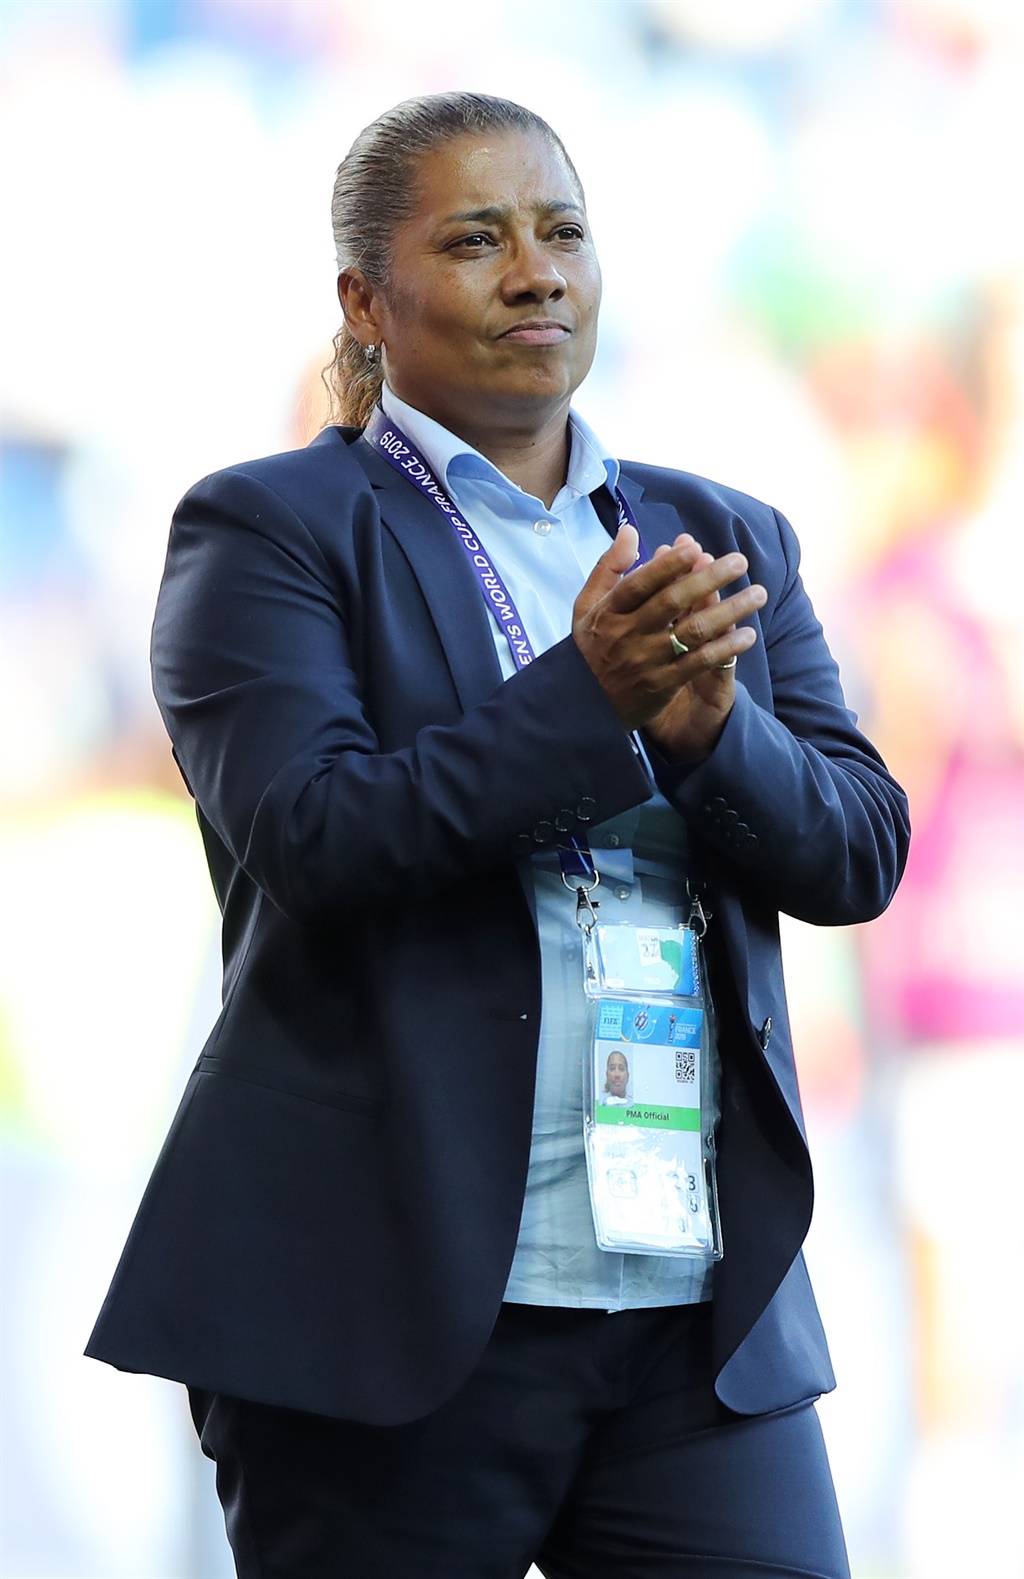 Desiree Ellis, Head Coach of South Africa shows appreciation to the fans after the 2019 FIFA Womens World Cup match.
Photo: Getty Images